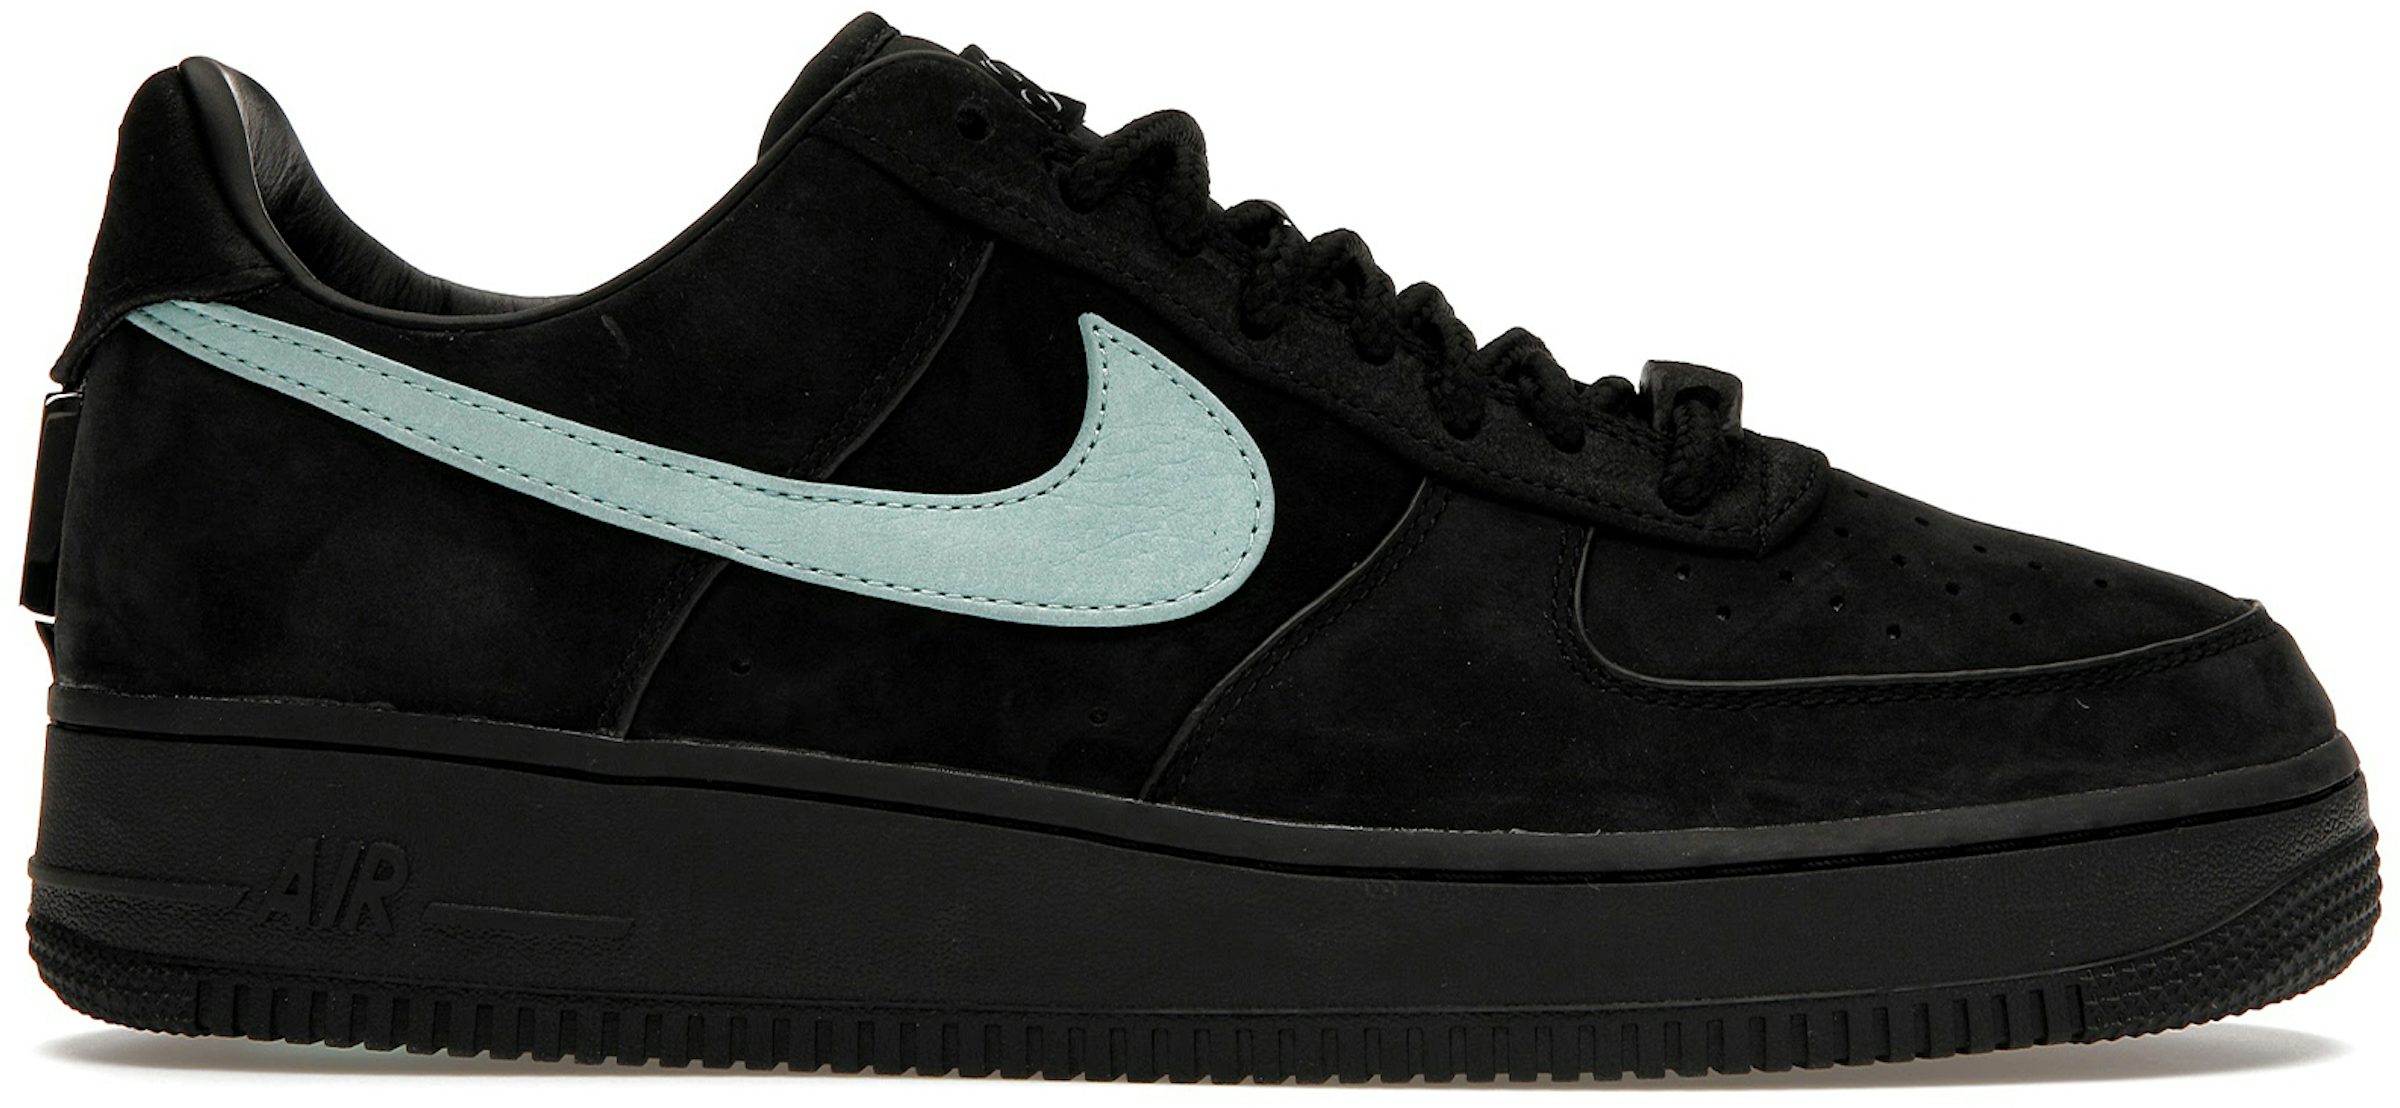 Buy Nike Louis Vuitton Online In India -  India